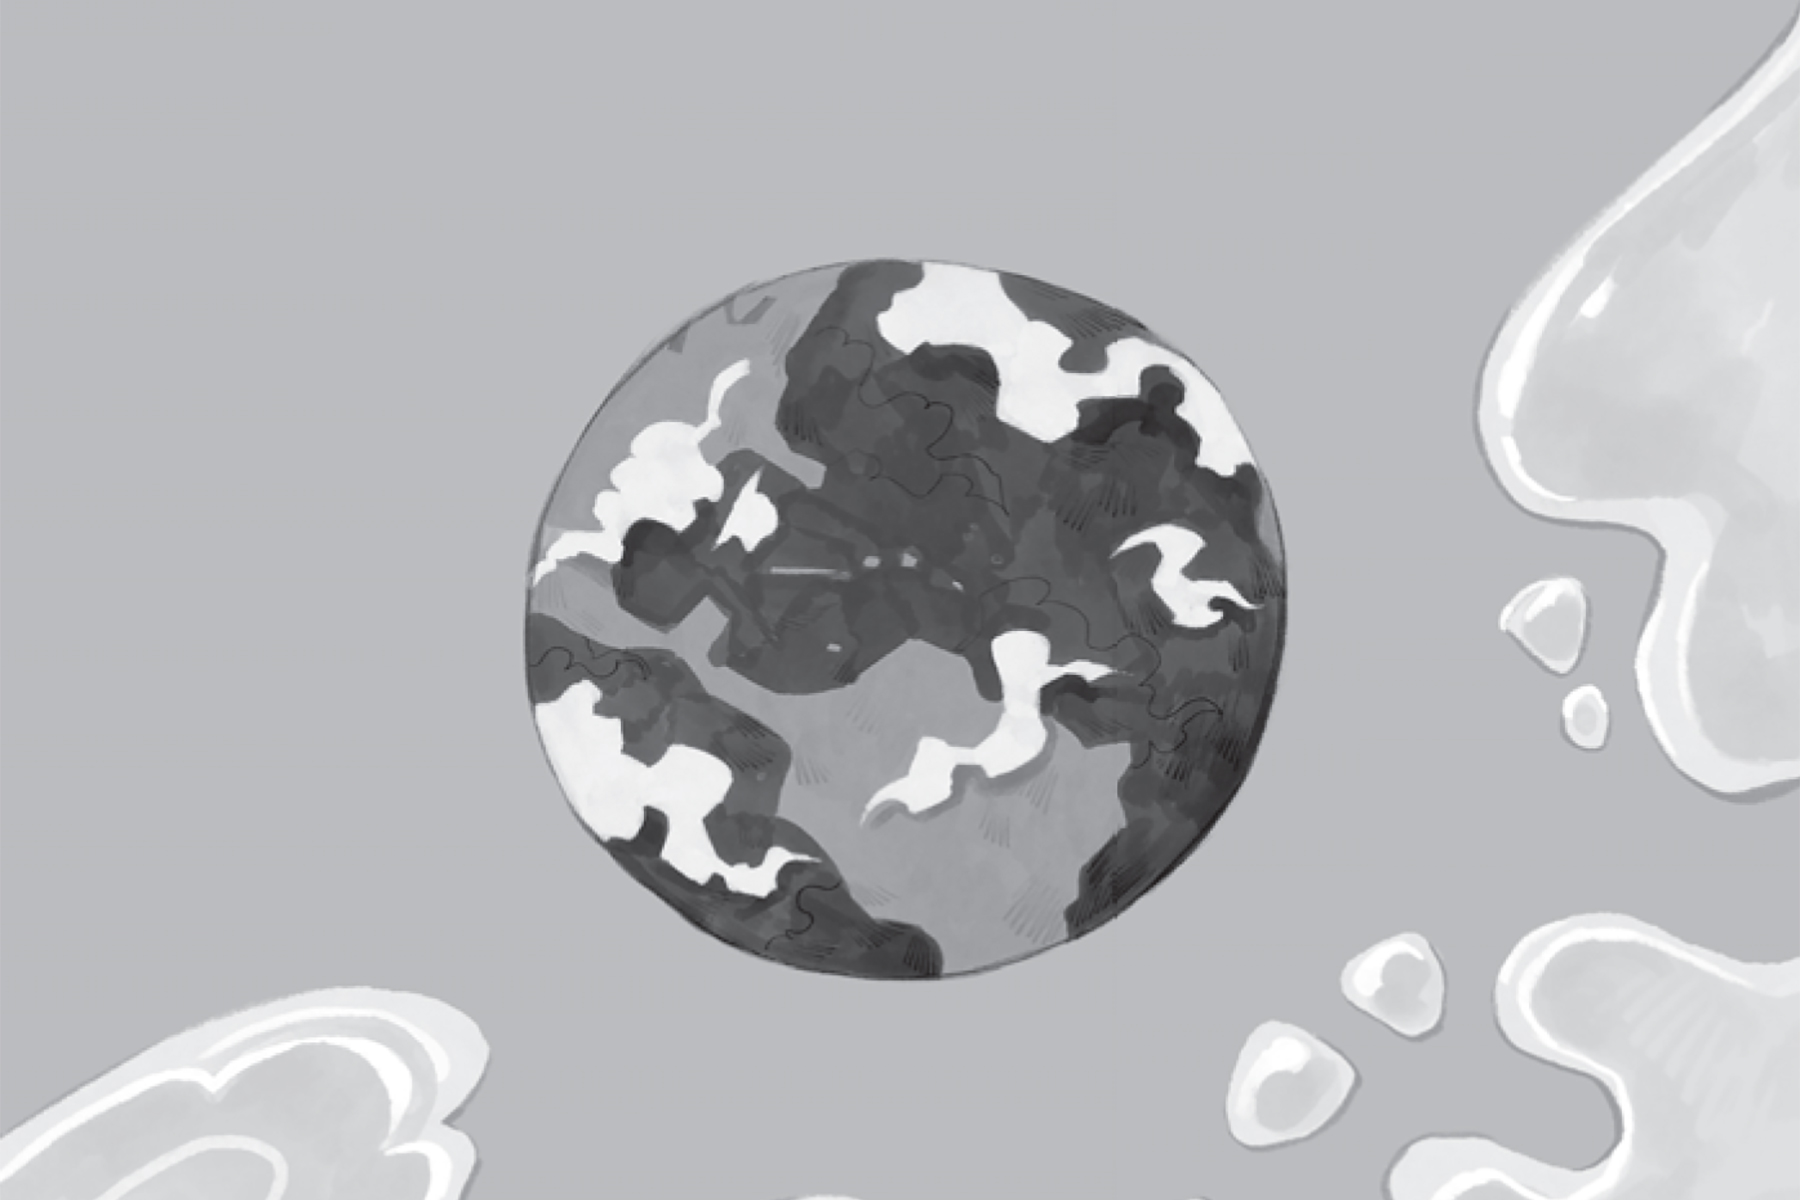 An illustration from Princess Olivia Investigates: The Wrong Weather showing the Earth from outer space